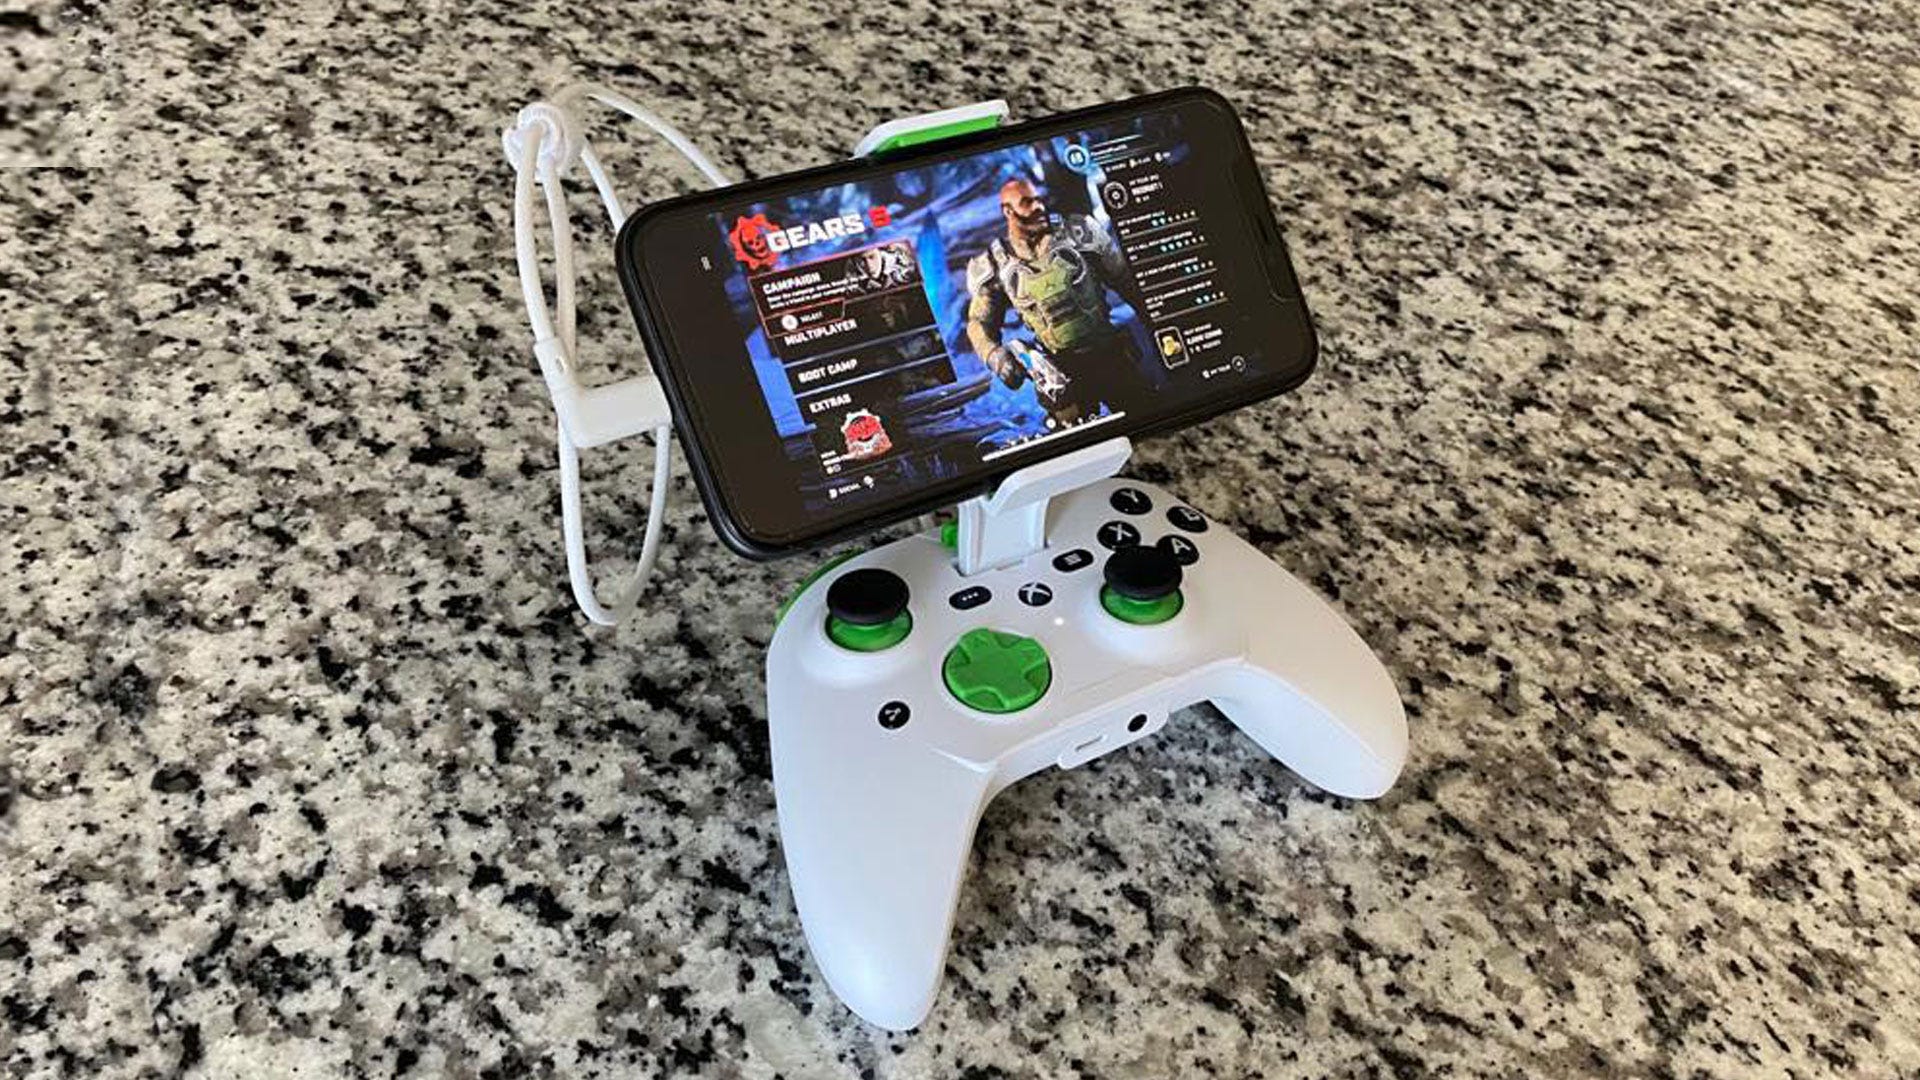 RiotPWR Xbox Cloud Gaming Controller (iOS) Review: A Clunky Design Is Better Than Nothing